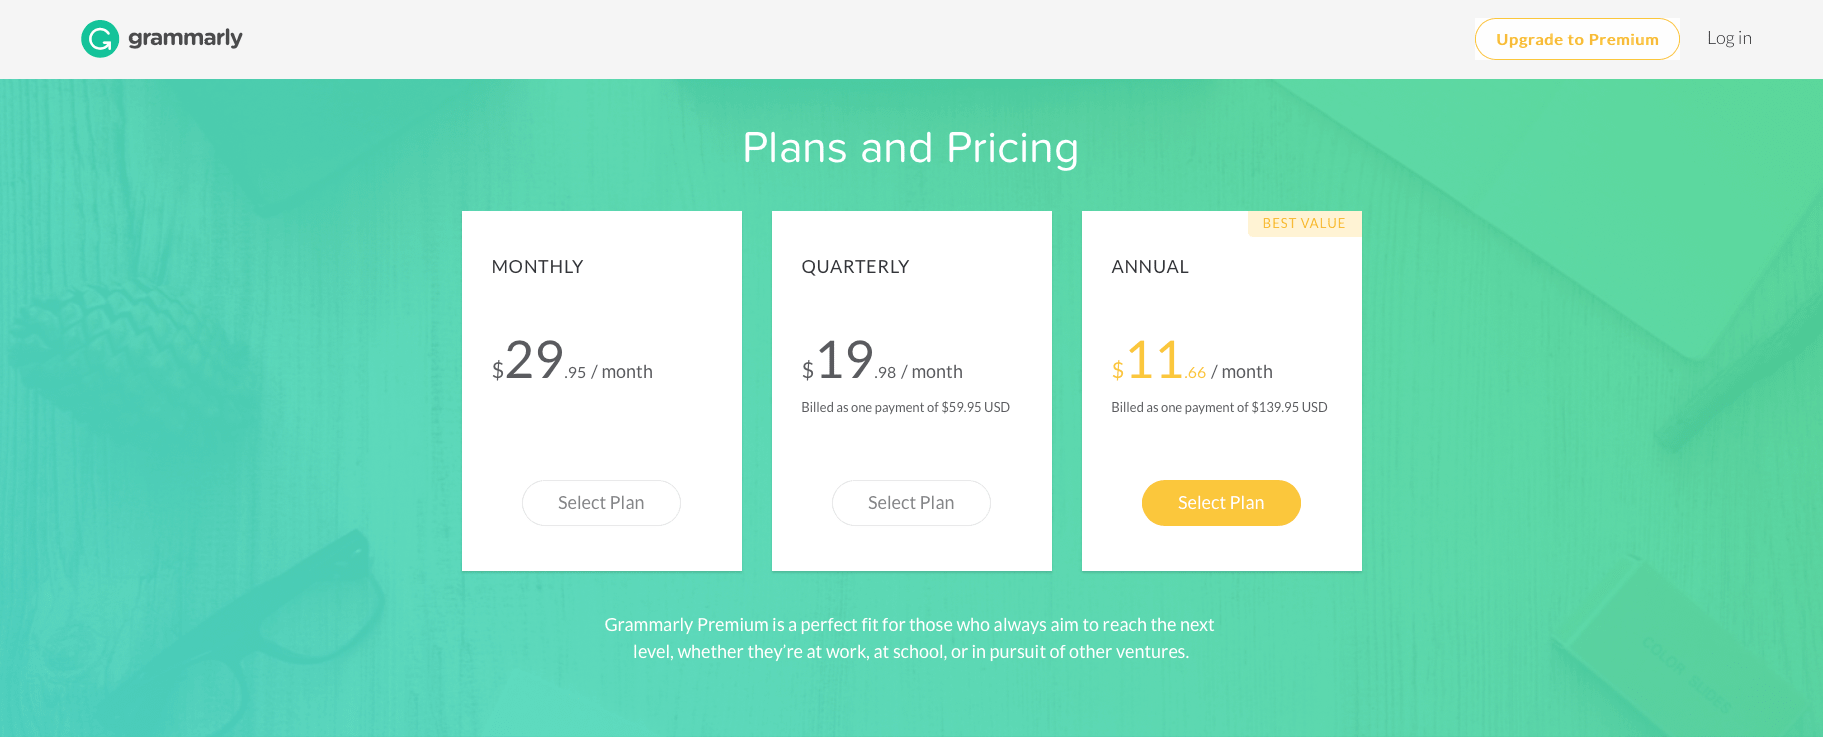 Screenshot of Grammarly plans and pricing